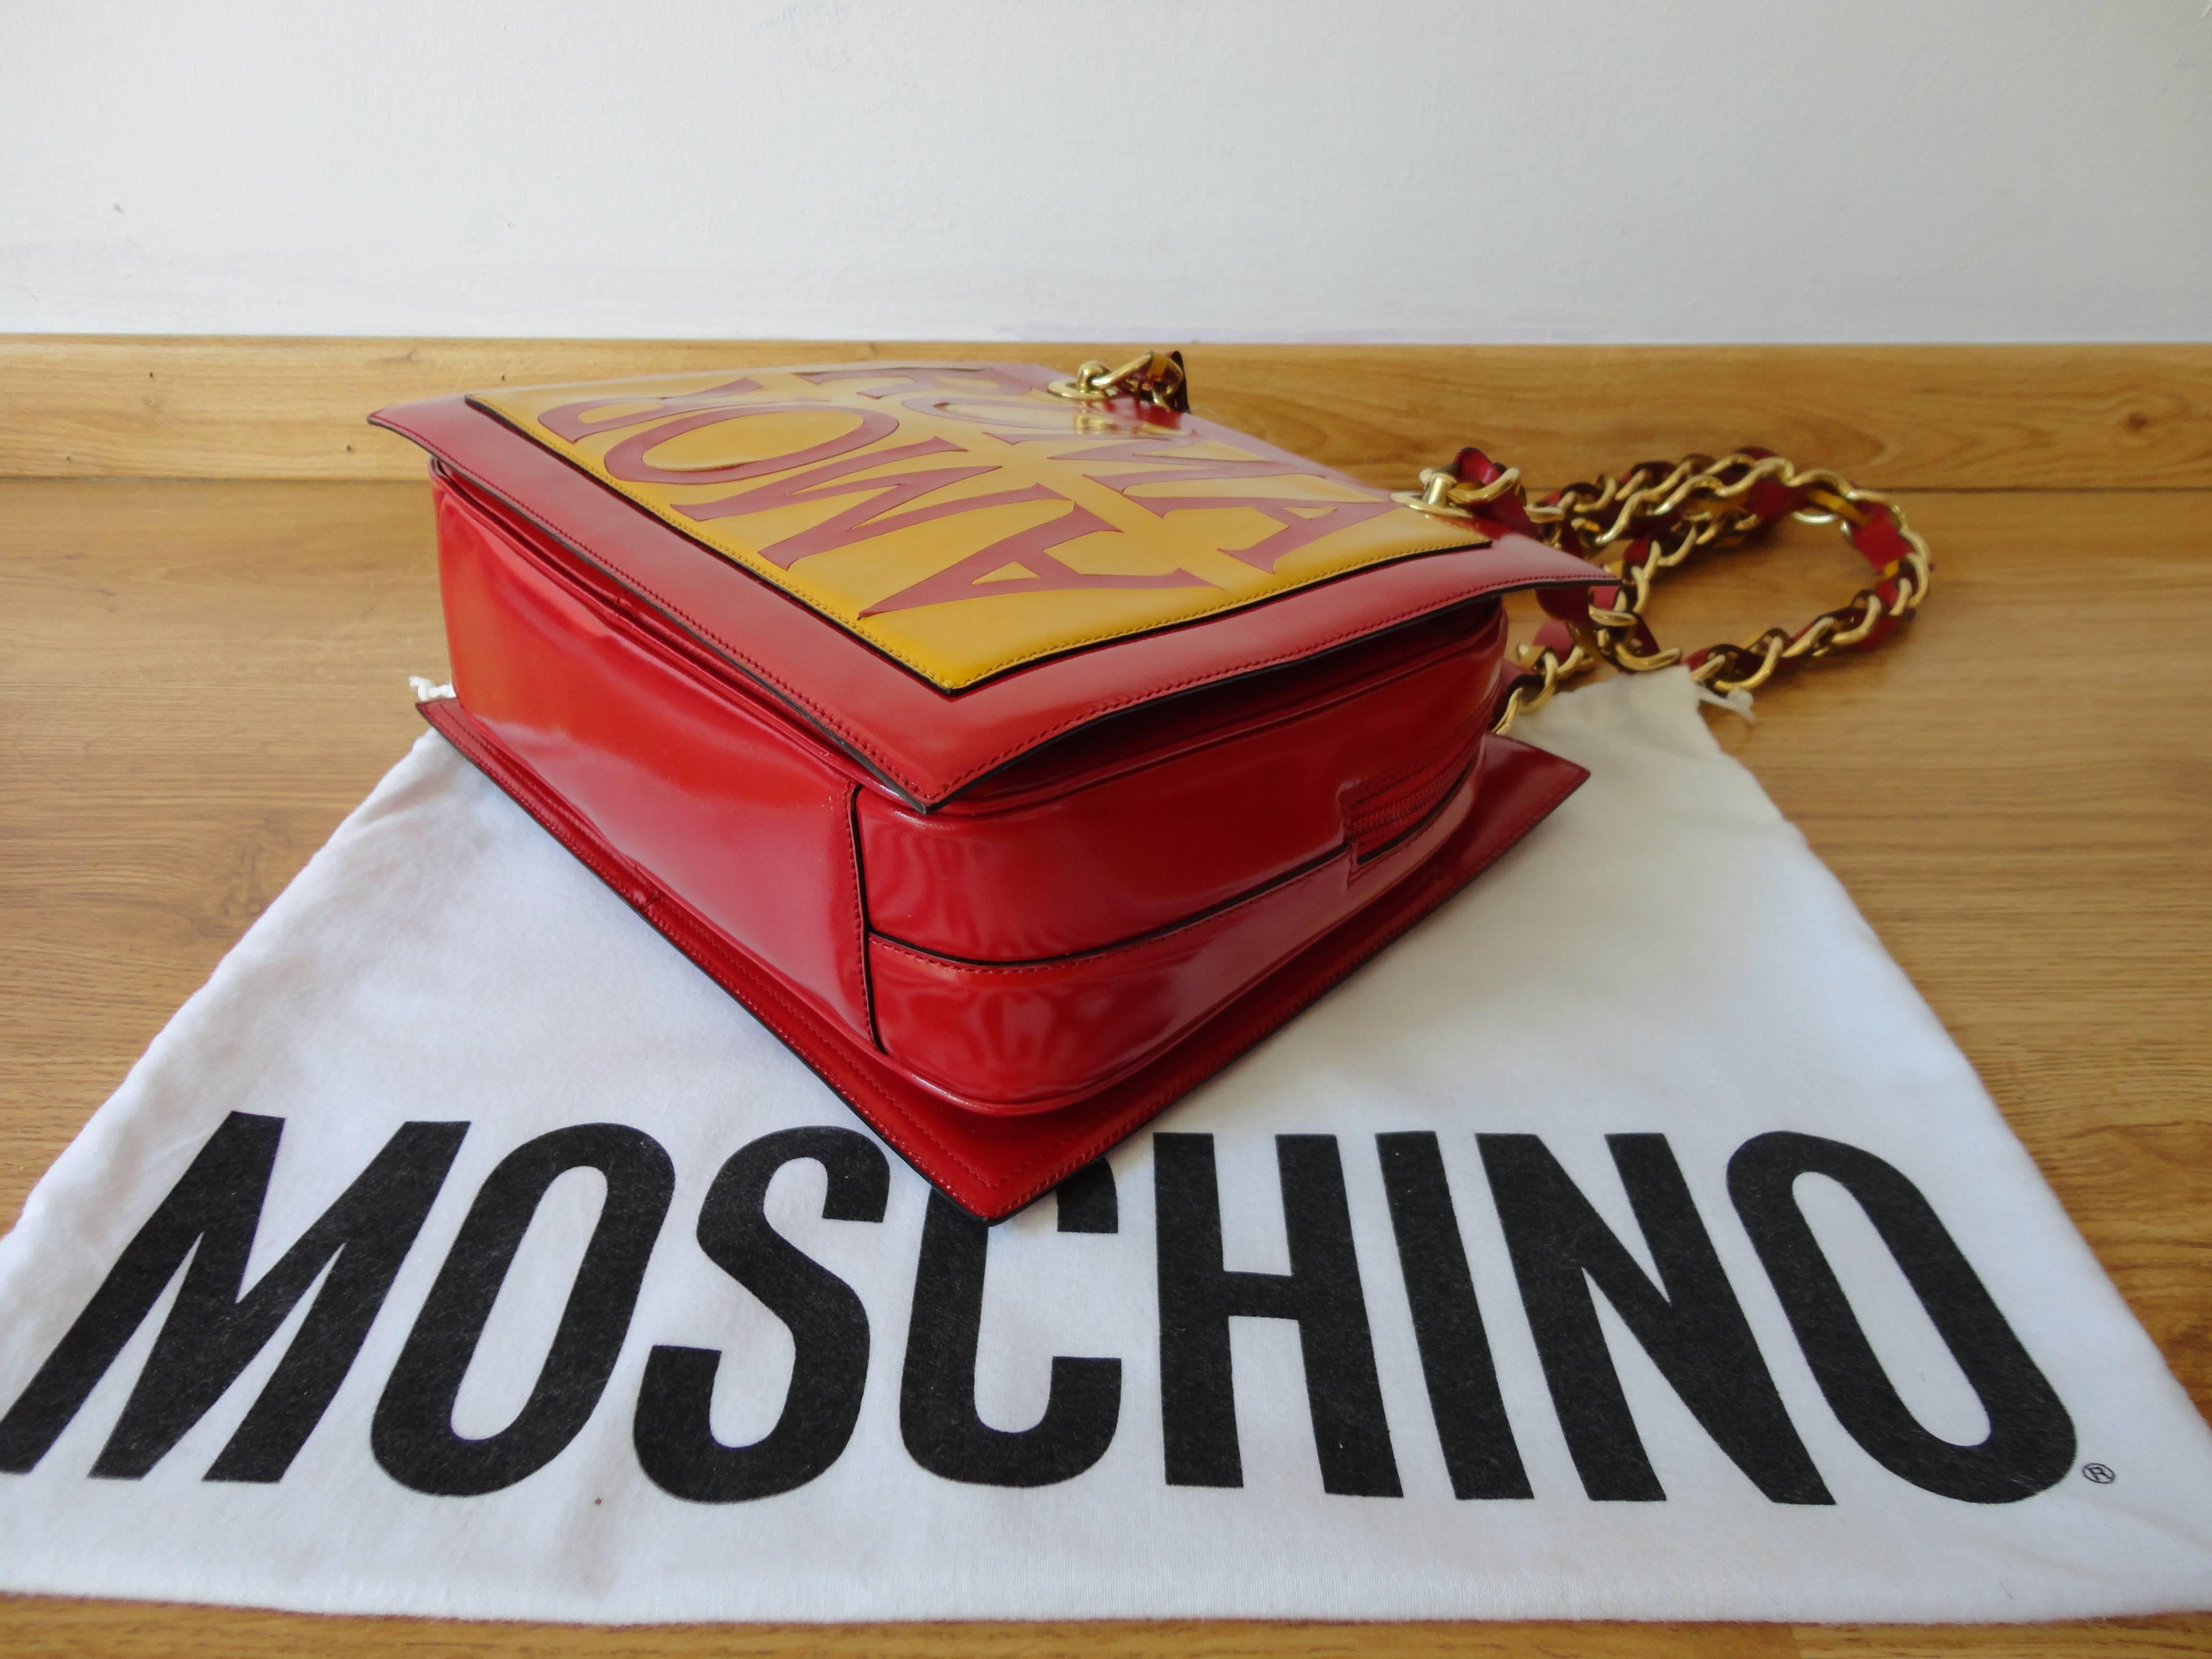 Moschino ROMA/AMOR bag.
Extremely rare collectors piece, one of them present at the Handbag Museum in Seoul.
Other then the marks on the back, due to the chain and how it was stored, the bag is in very good condition both inside and out.
The